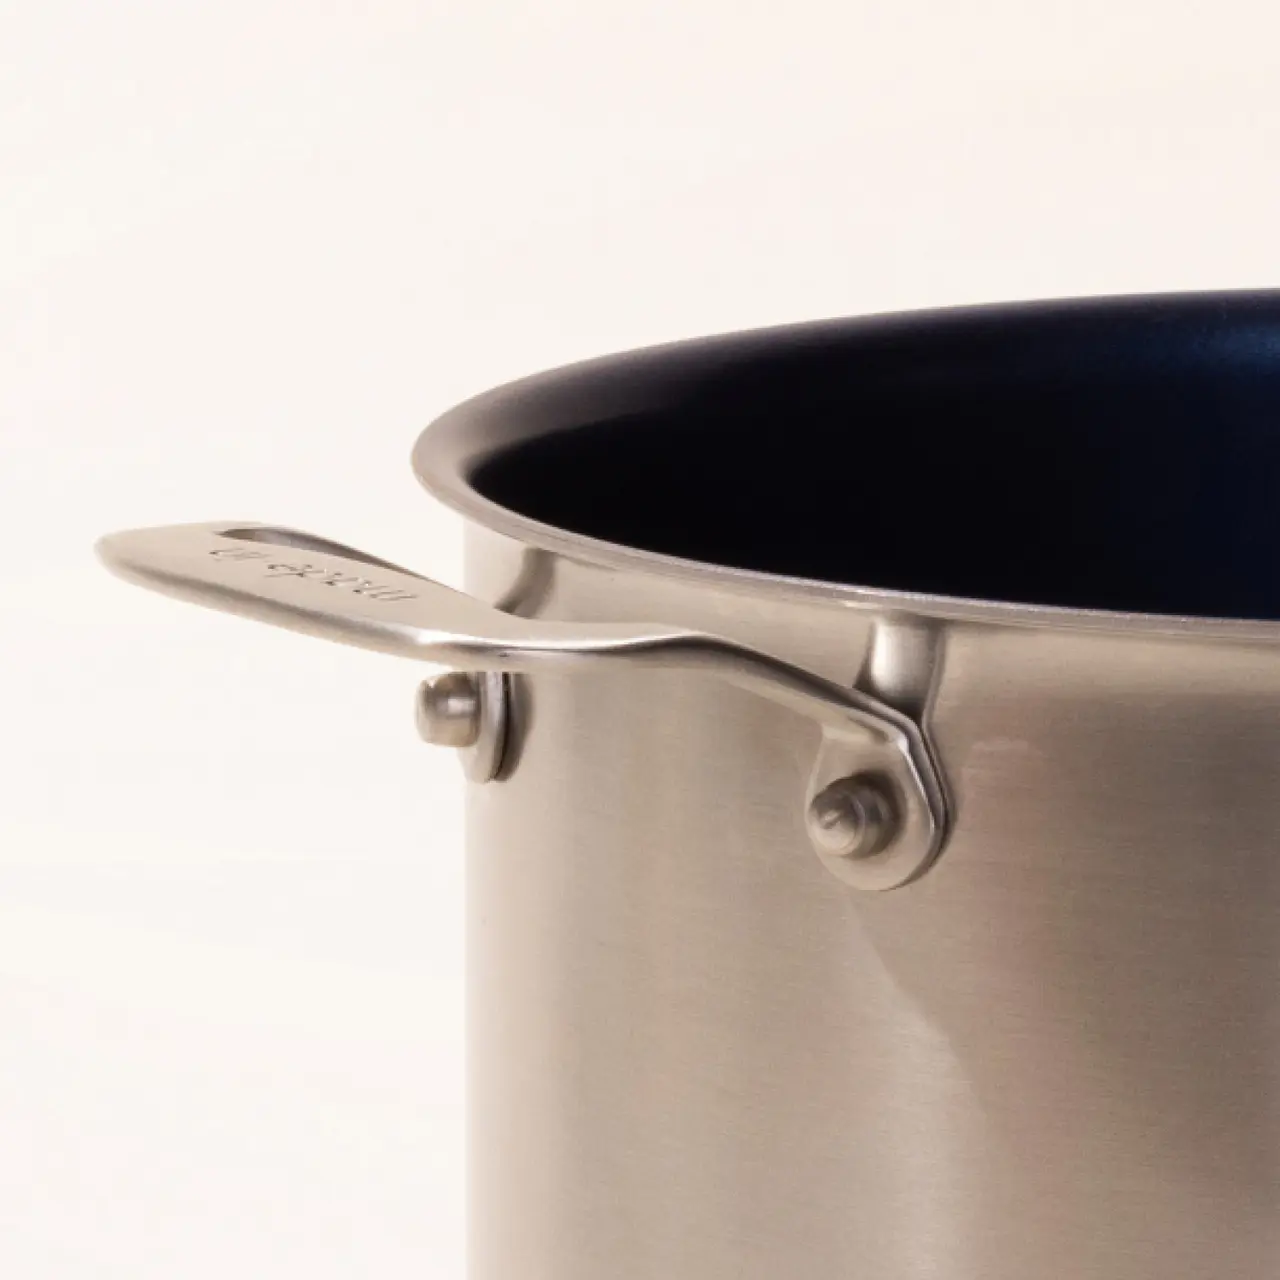 A close-up of a stainless steel pot with a blue interior and a visible brand name on the handle.